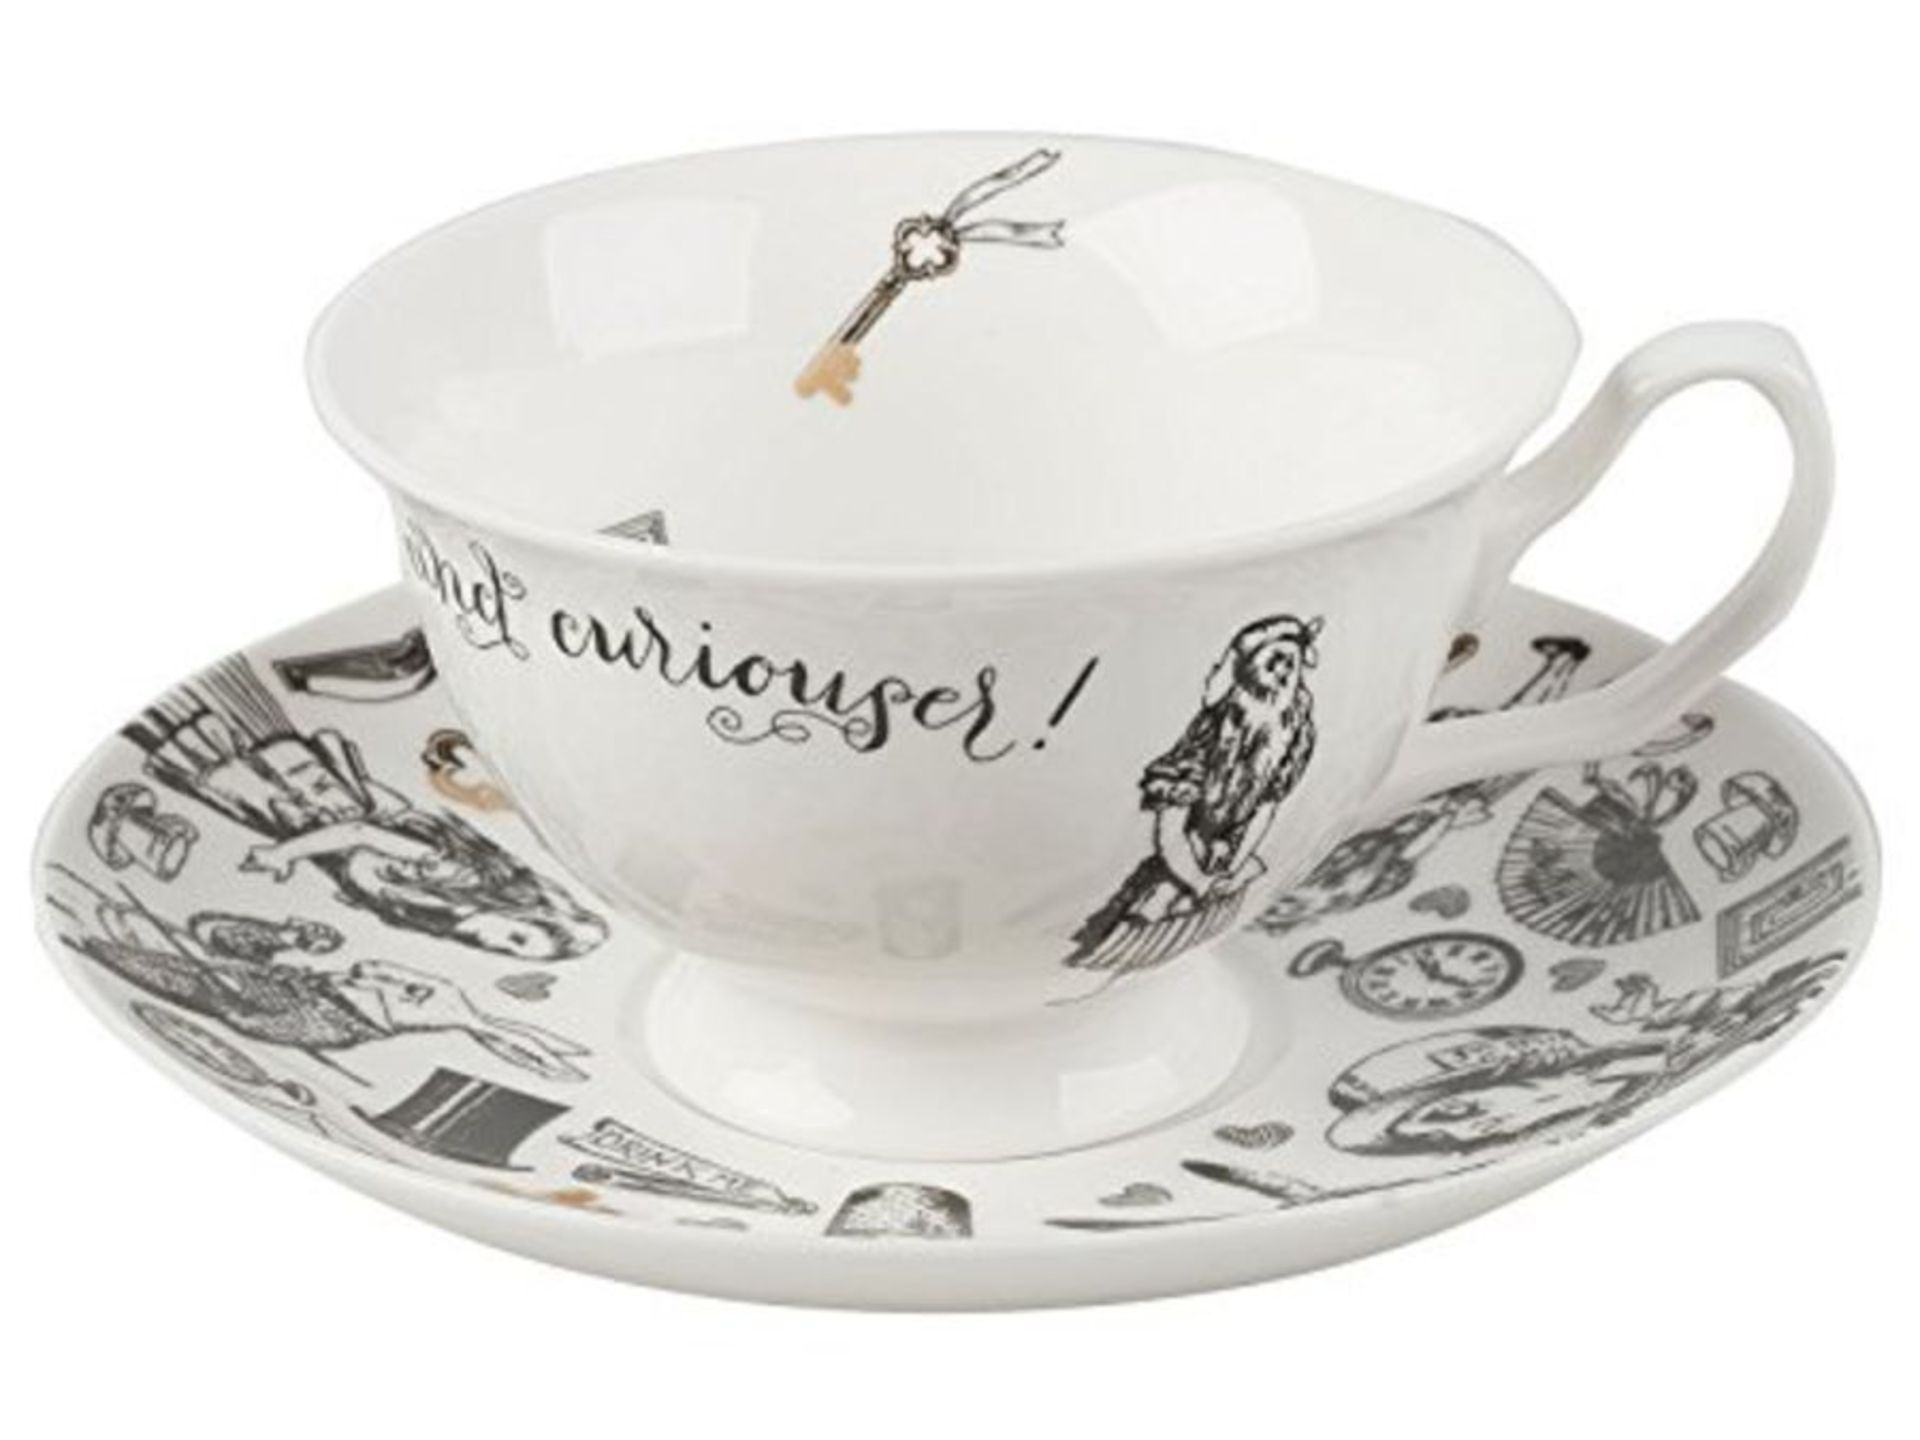 V&A 5200018 Alice in Wonderland Cup and Saucer, 210 ml (7 fl oz), White